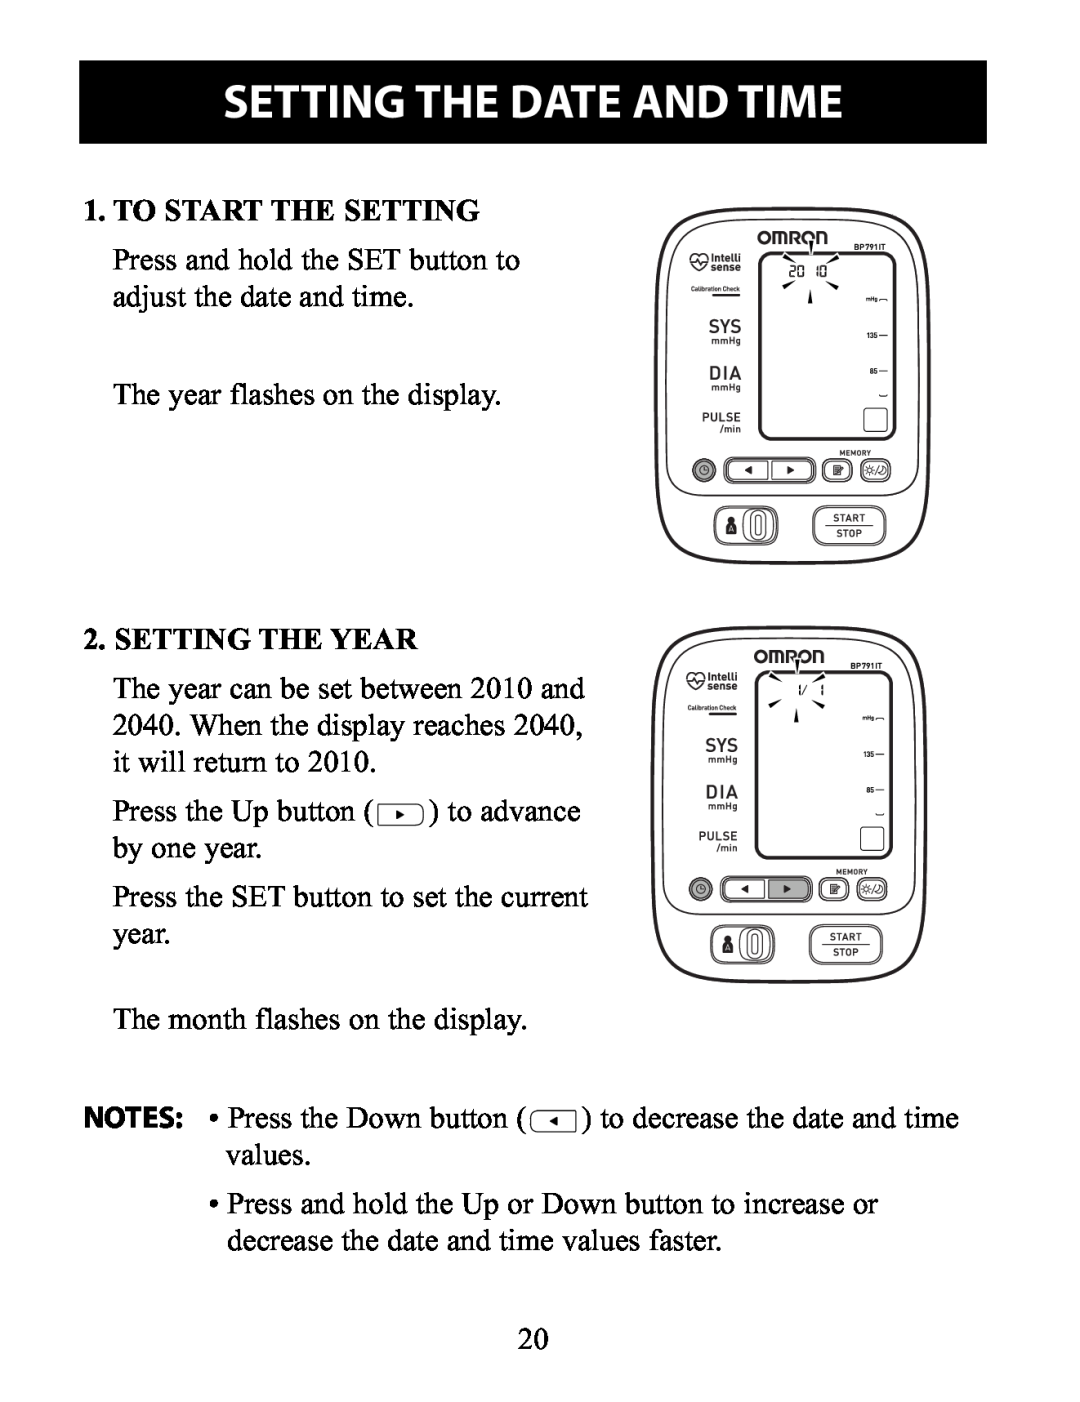 Omron Healthcare BP791IT instruction manual To Start The Setting, Setting The Year, Setting The Date And Time 